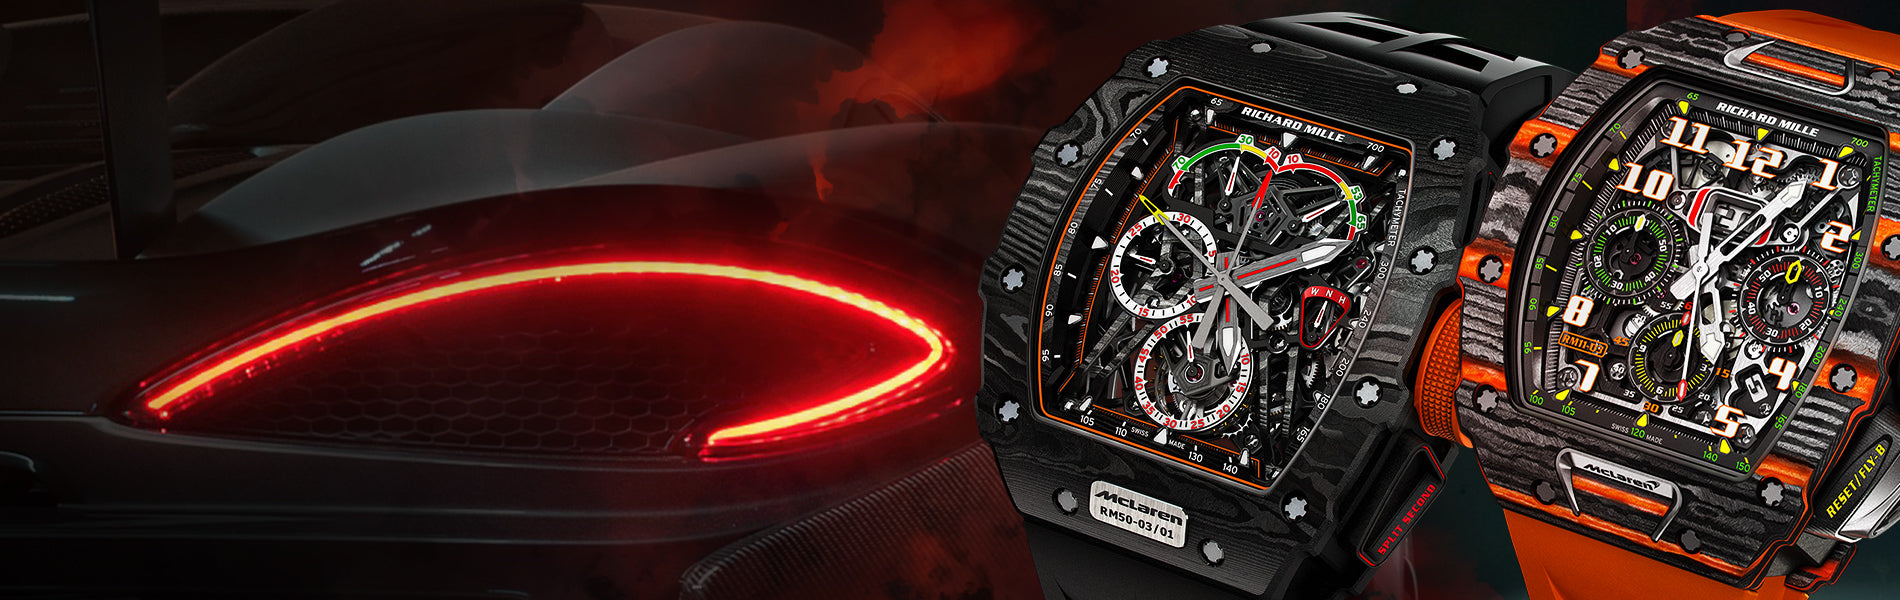 The full story about Richard Mille -The Watch Stand